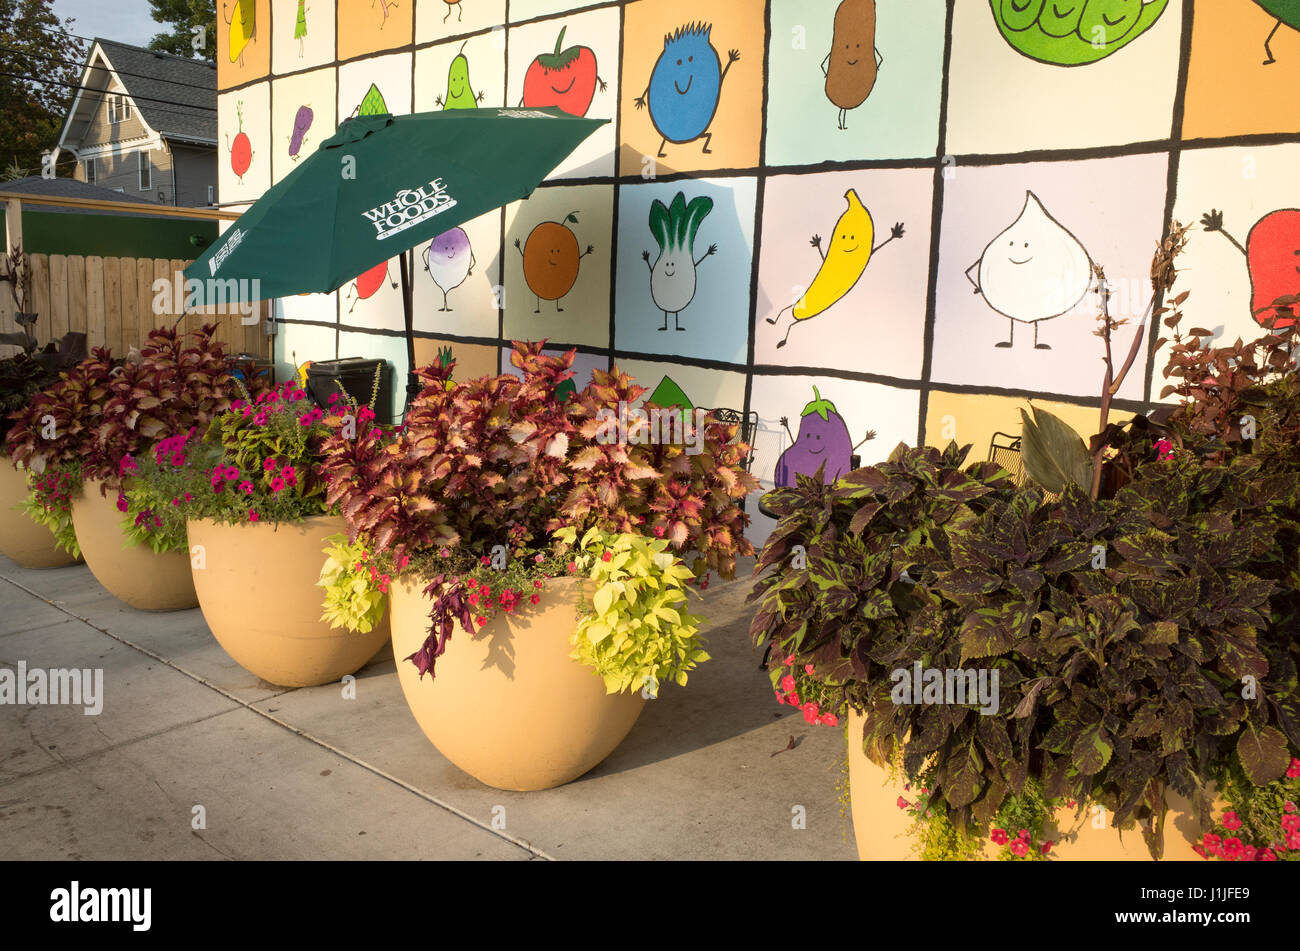 Wall of painted vegetables, potted plants and a Whole Foods umbrella. St Paul Minnesota MN USA Stock Photo